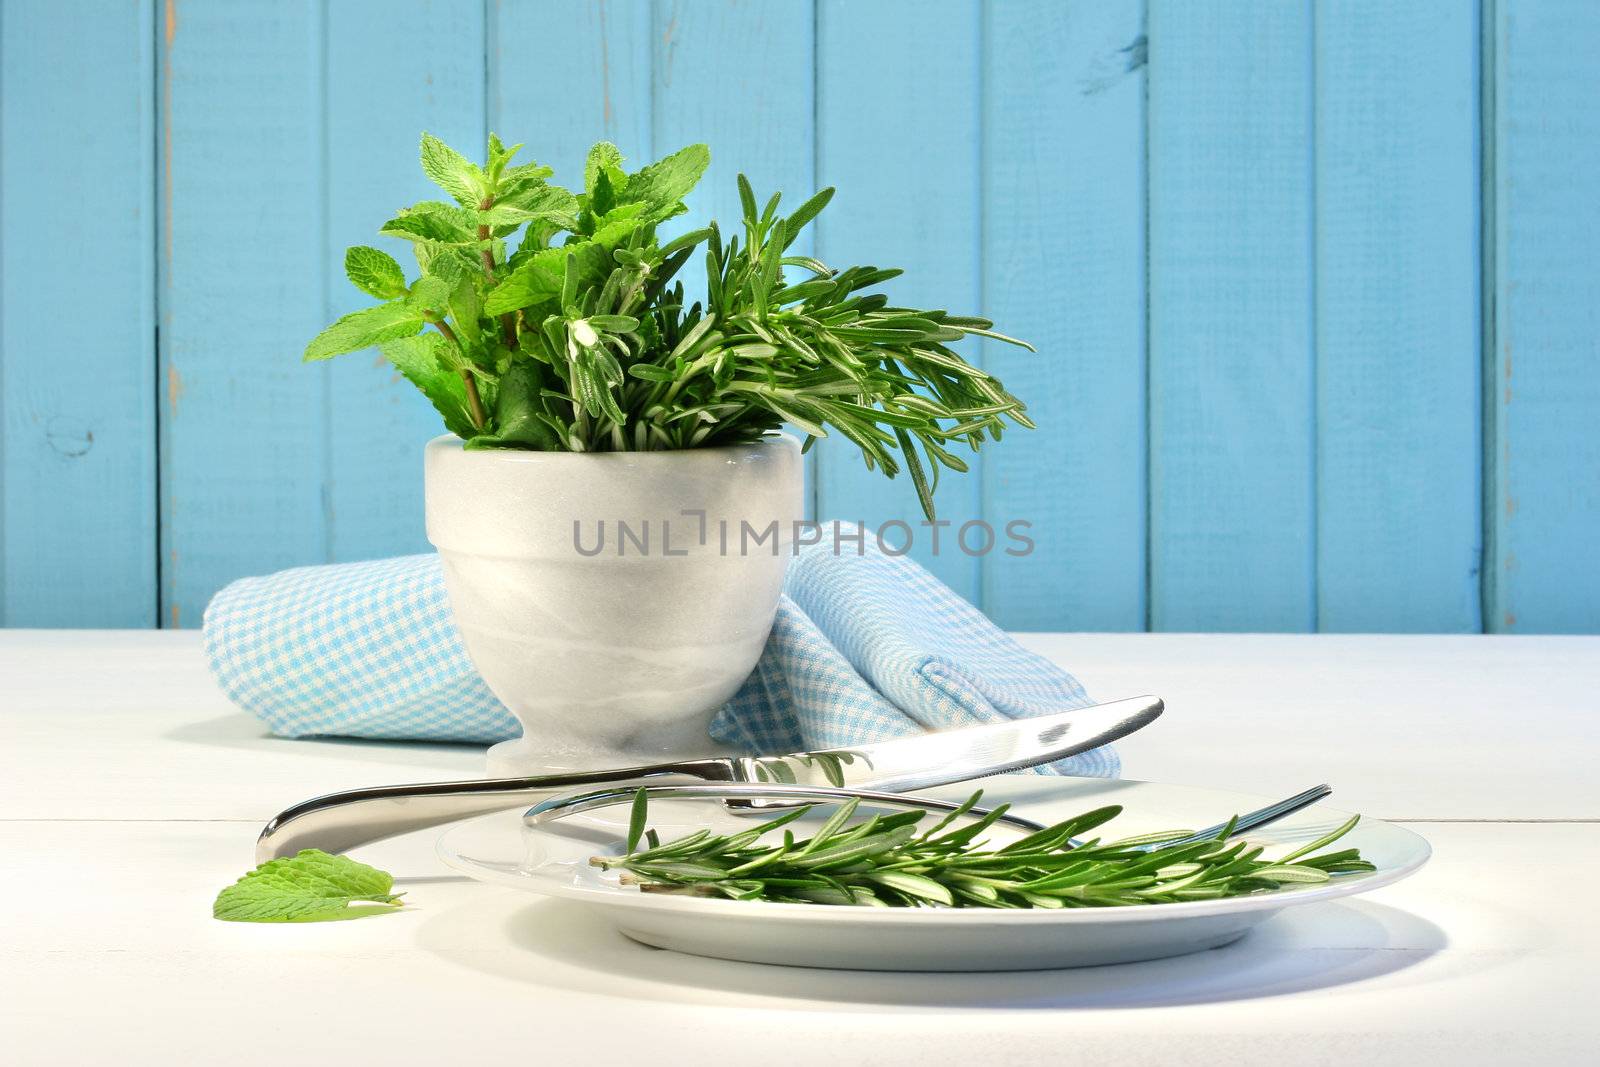 Fresh herbs on the table with plate and utensils 